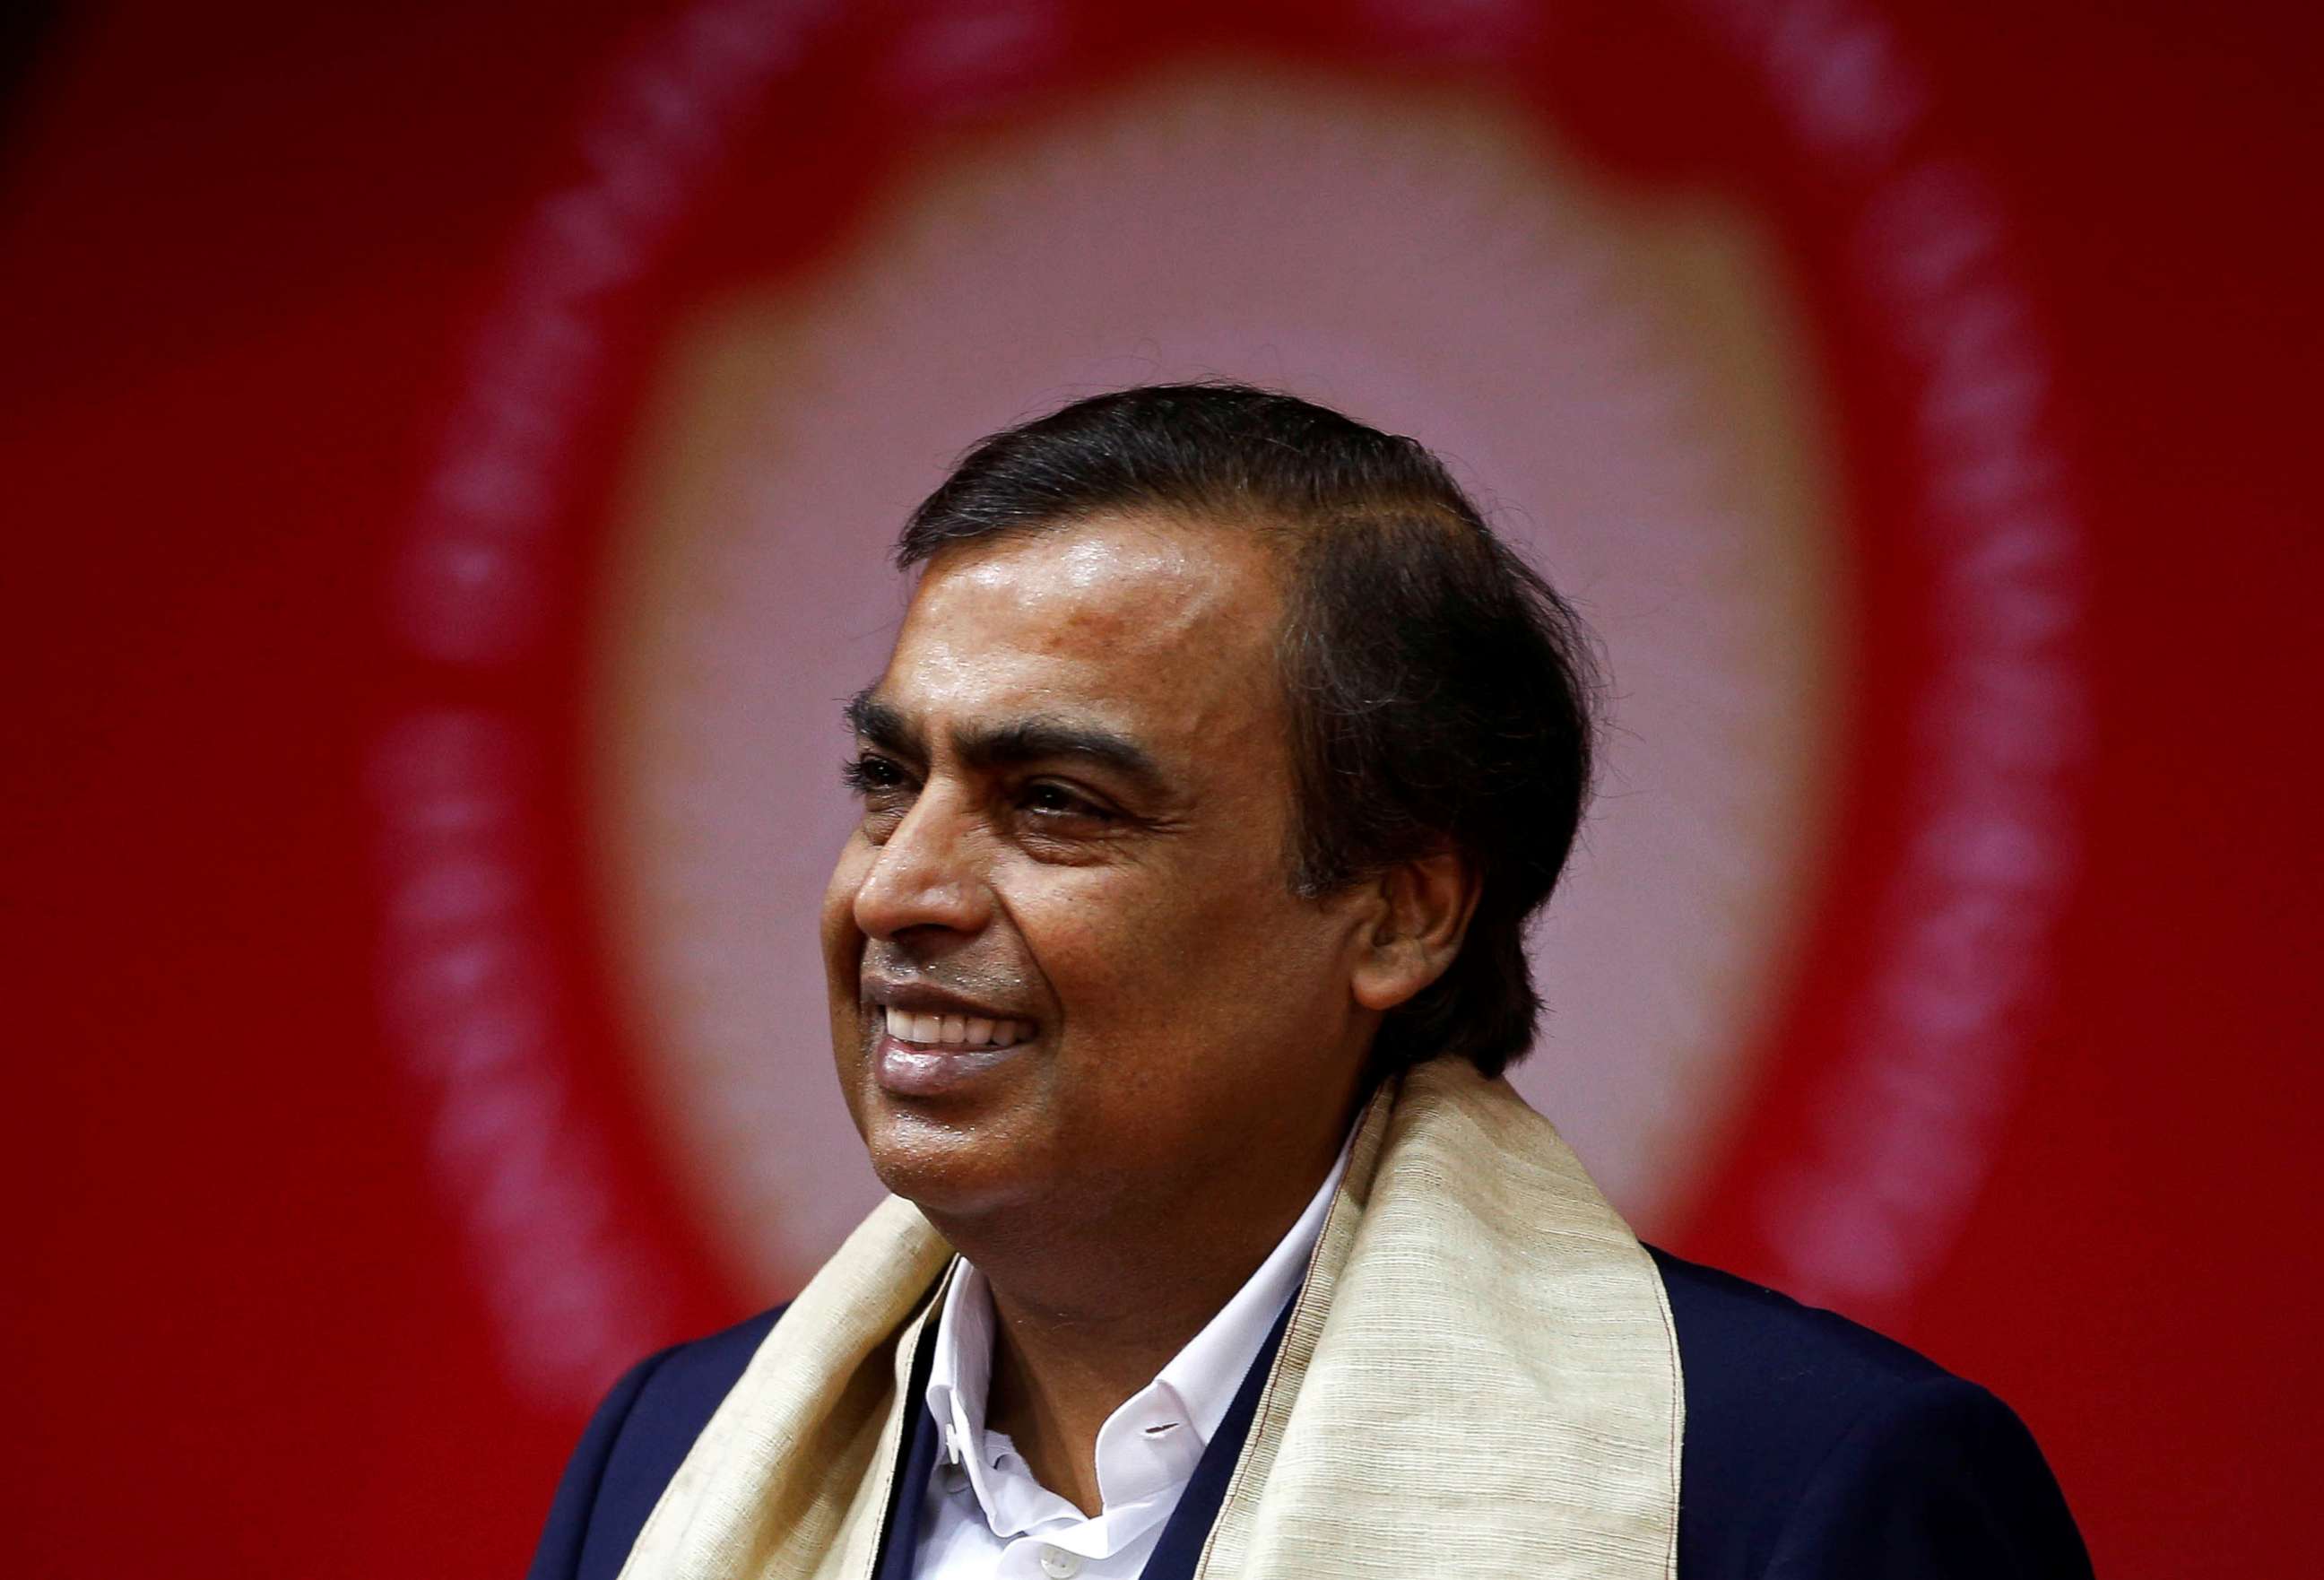 PHOTO: In this Sept. 23, 2017 file photo Mukesh Ambani, Chairman and Managing Director of Reliance Industries, attends a convocation at the Pandit Deendayal Petroleum University in Gandhinagar, India.